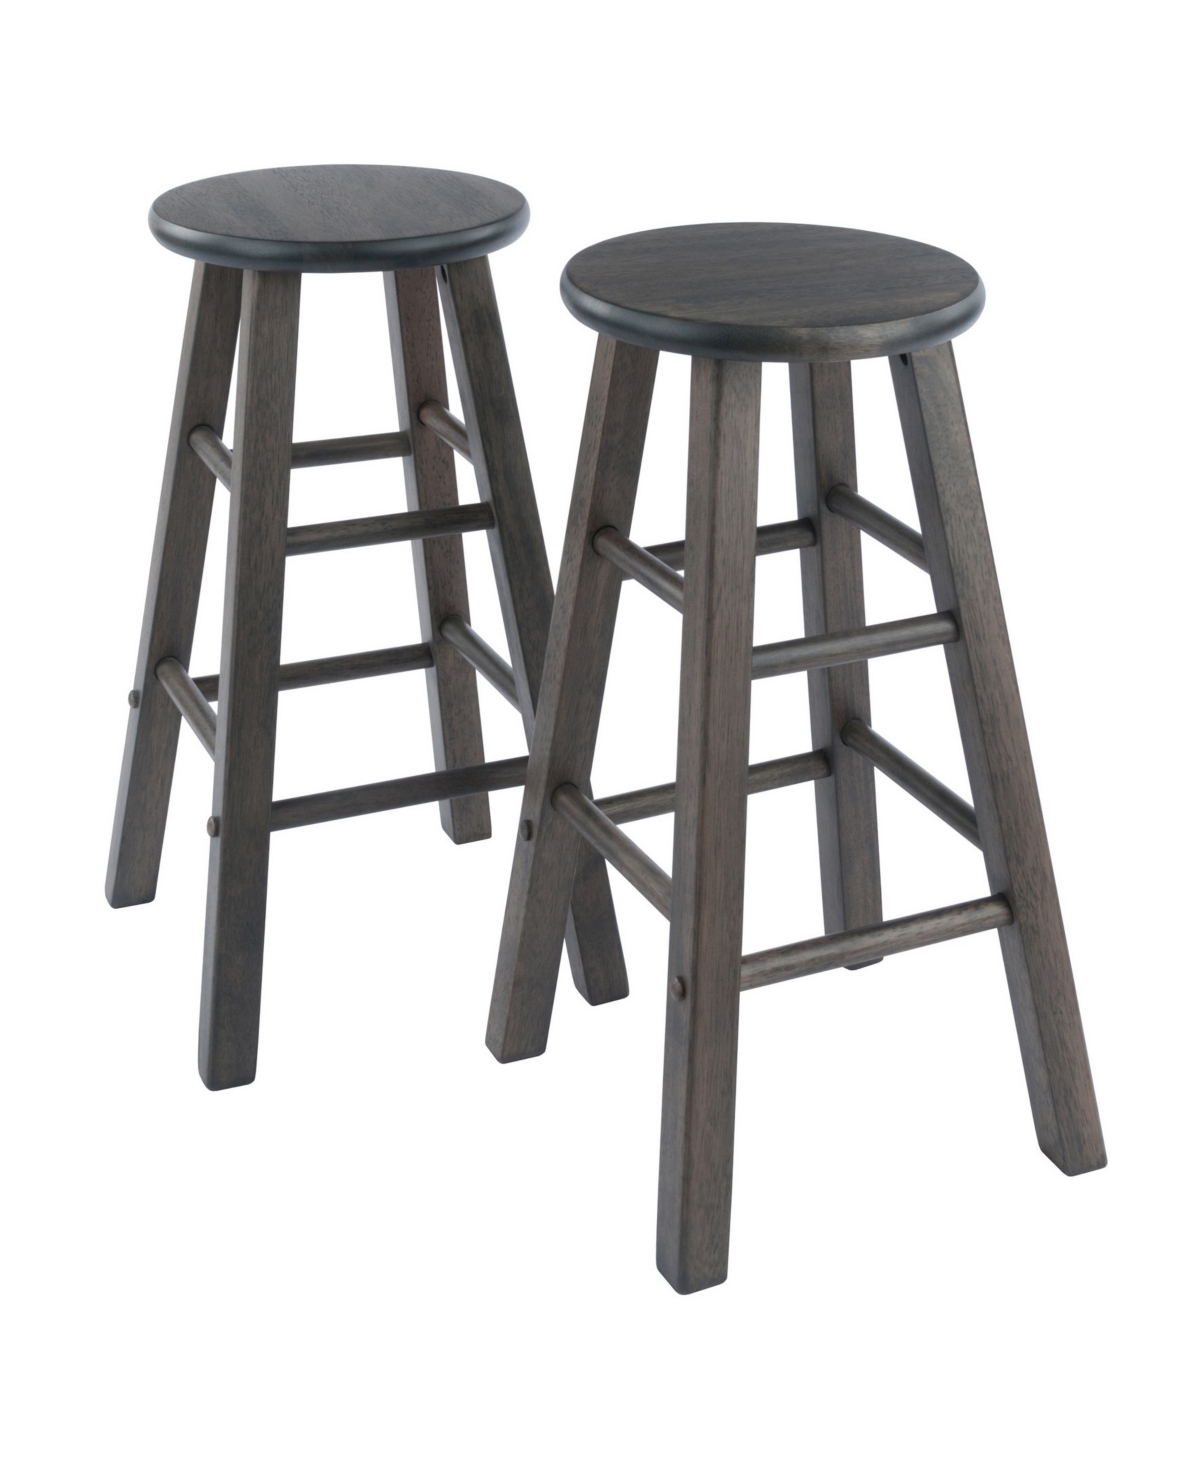 Winsome Element 2-piece Wood Counter Stool Set In Oyster Gray